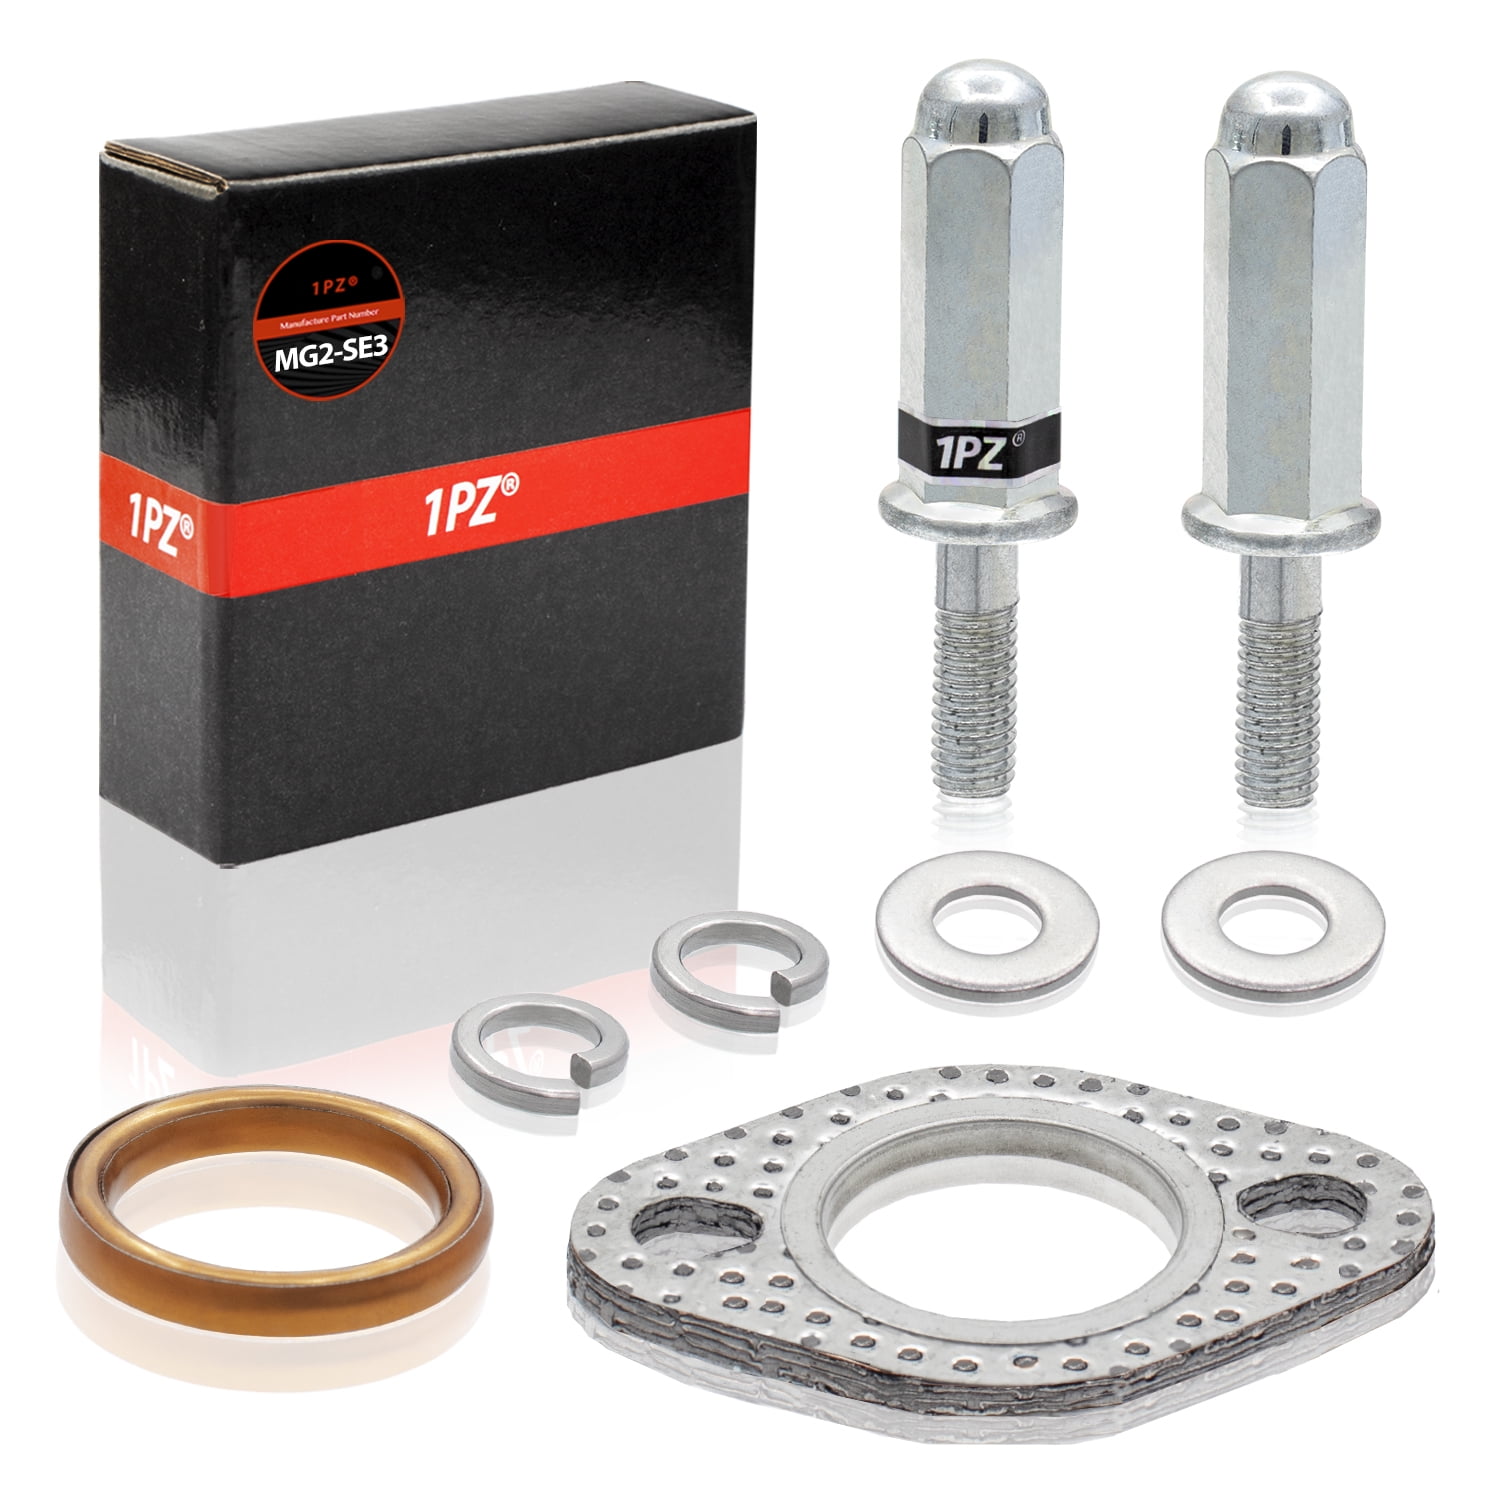 MYK Full Gasket & seals kit Fits most 125cc Chinese ATV/dirt bikes and many other models